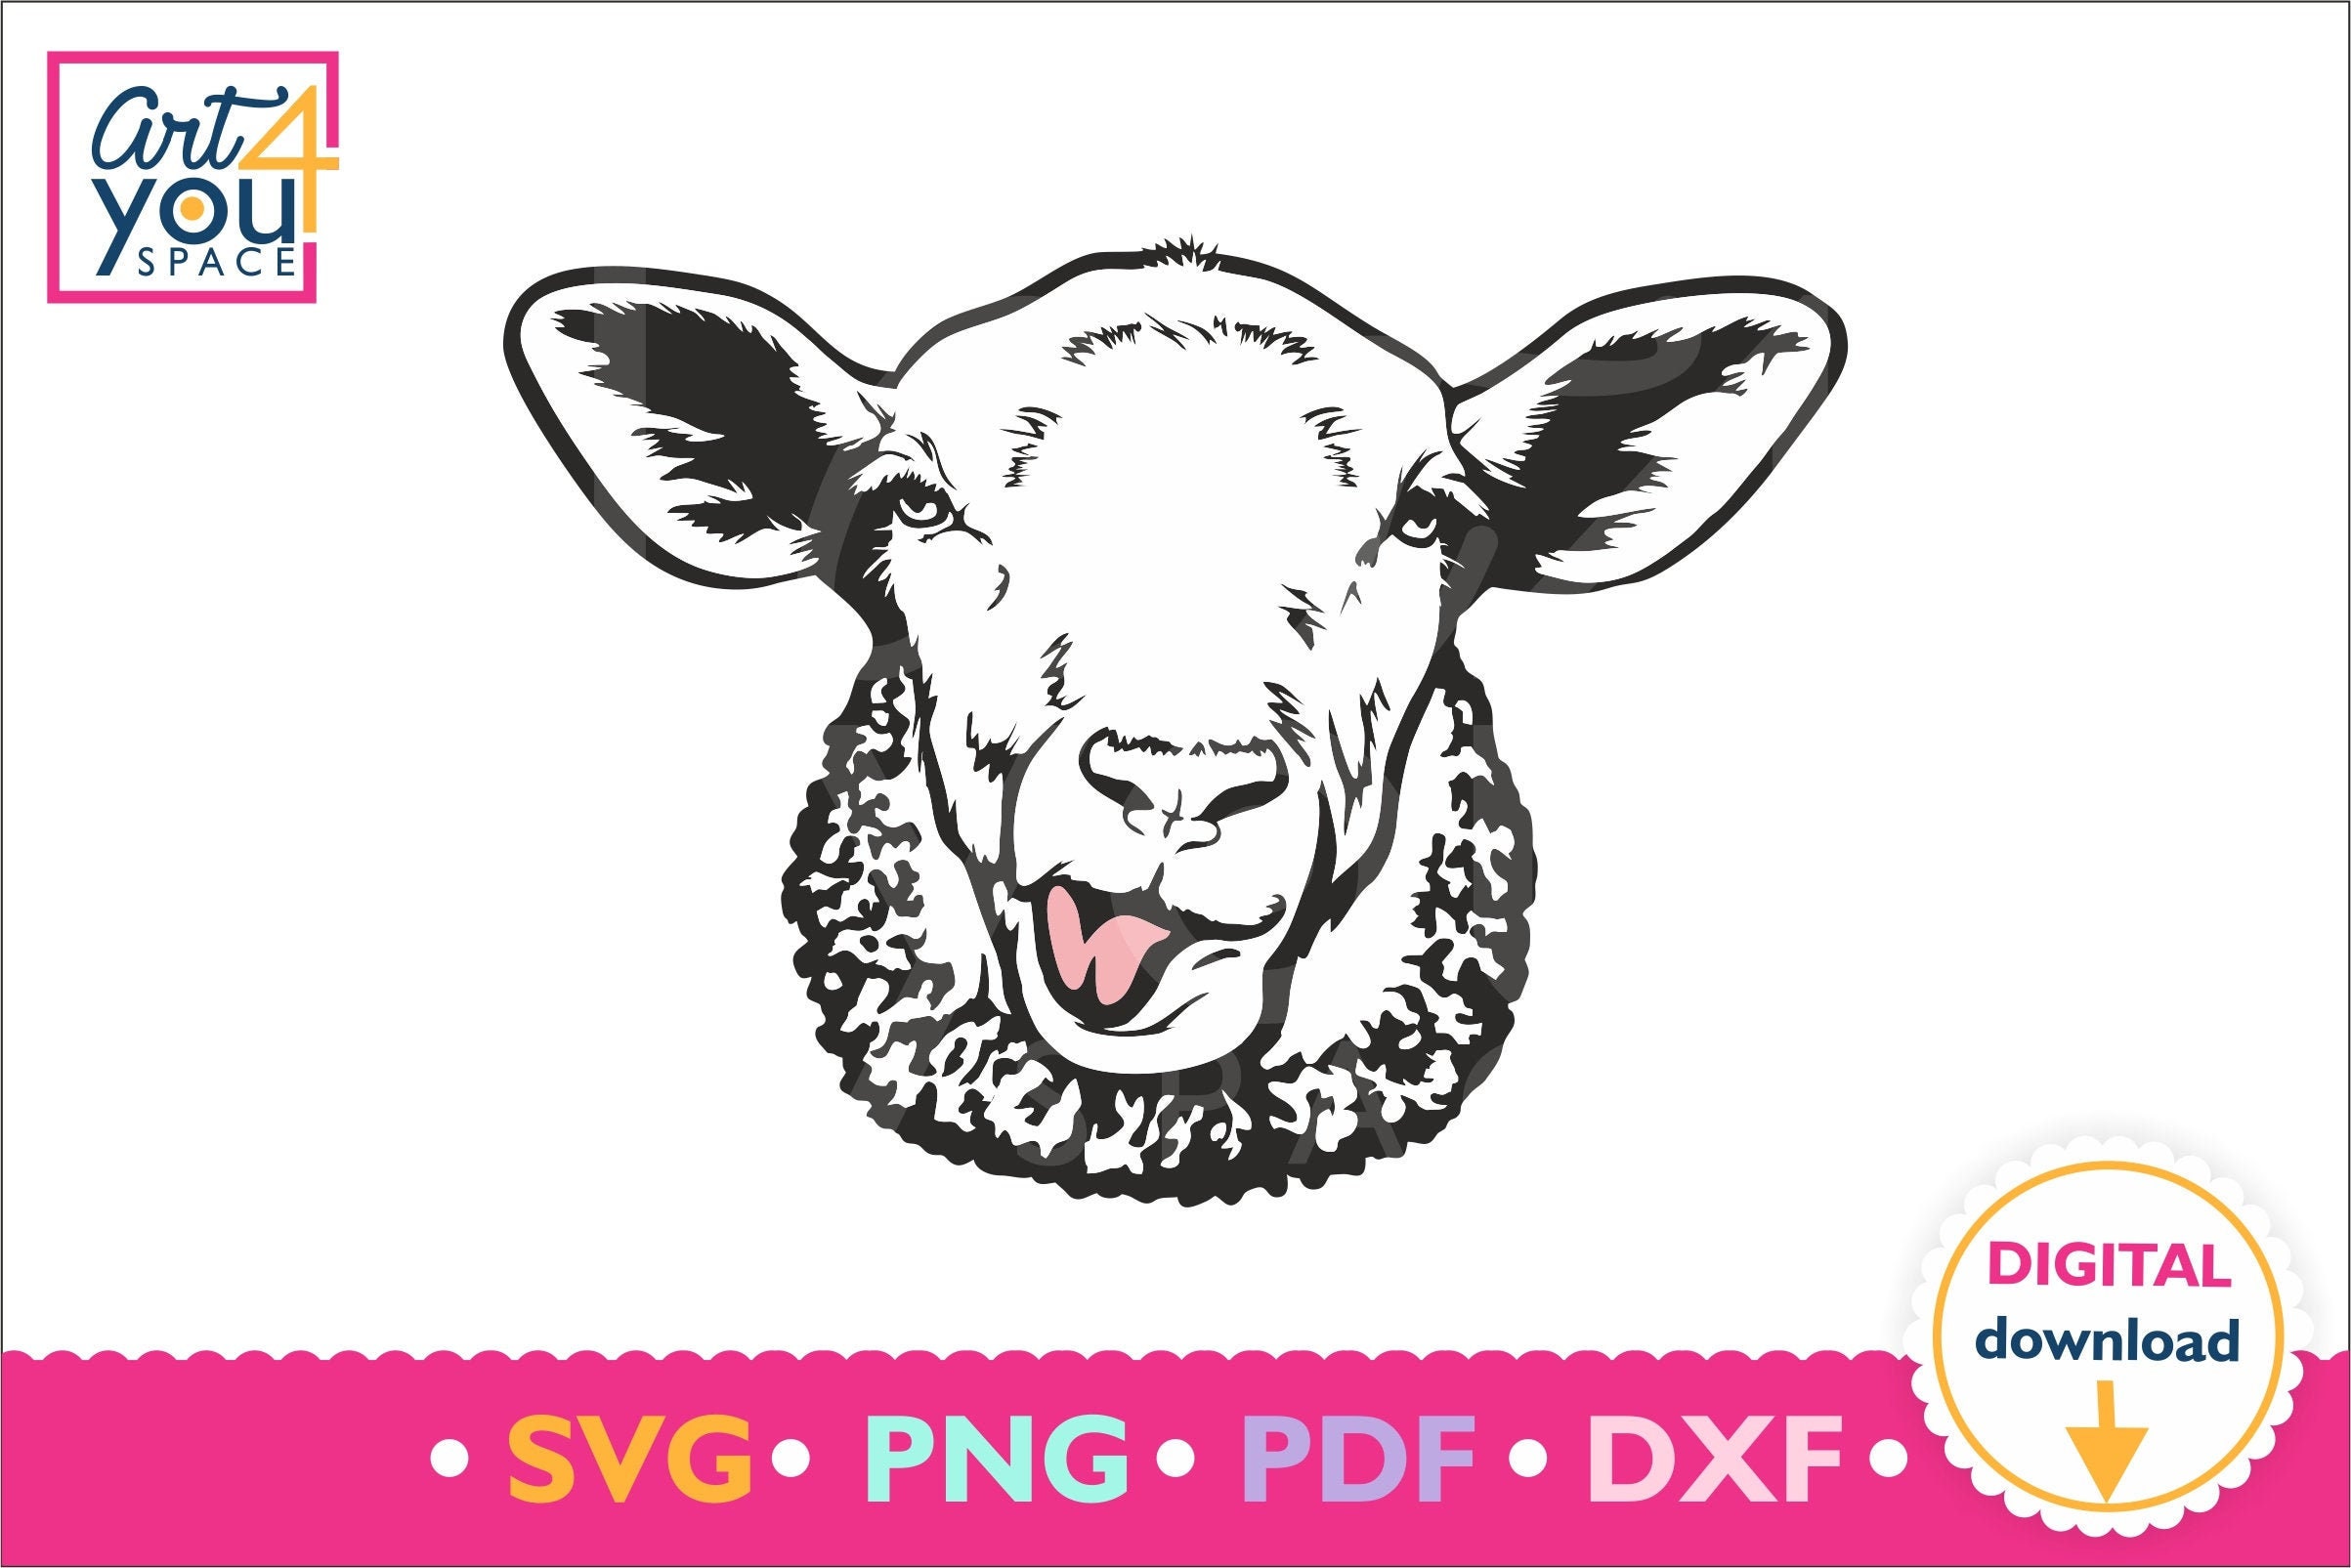 Download Sheep Face Svg Sheep Silhouette Funny Lamb Svg Sheep Svg Files For Cricut Flock Of Sheep Svg Sheep Clipart Sheep Vector Sheep Design Art Collectibles Photography Minyamarket Com